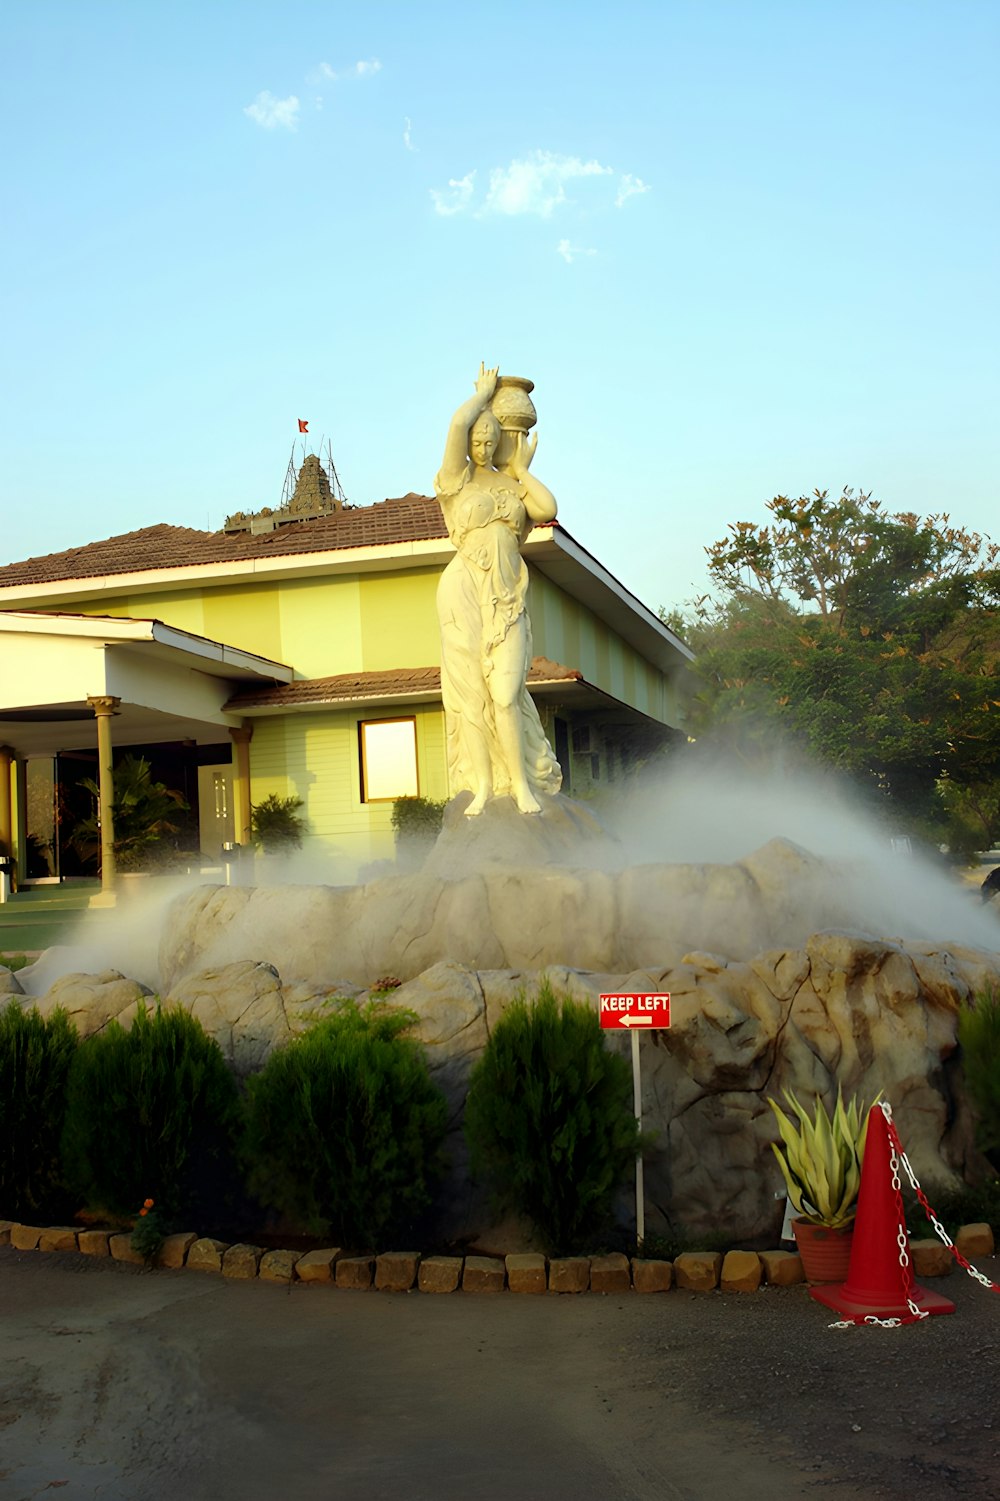 a fire hydrant spraying water on a statue